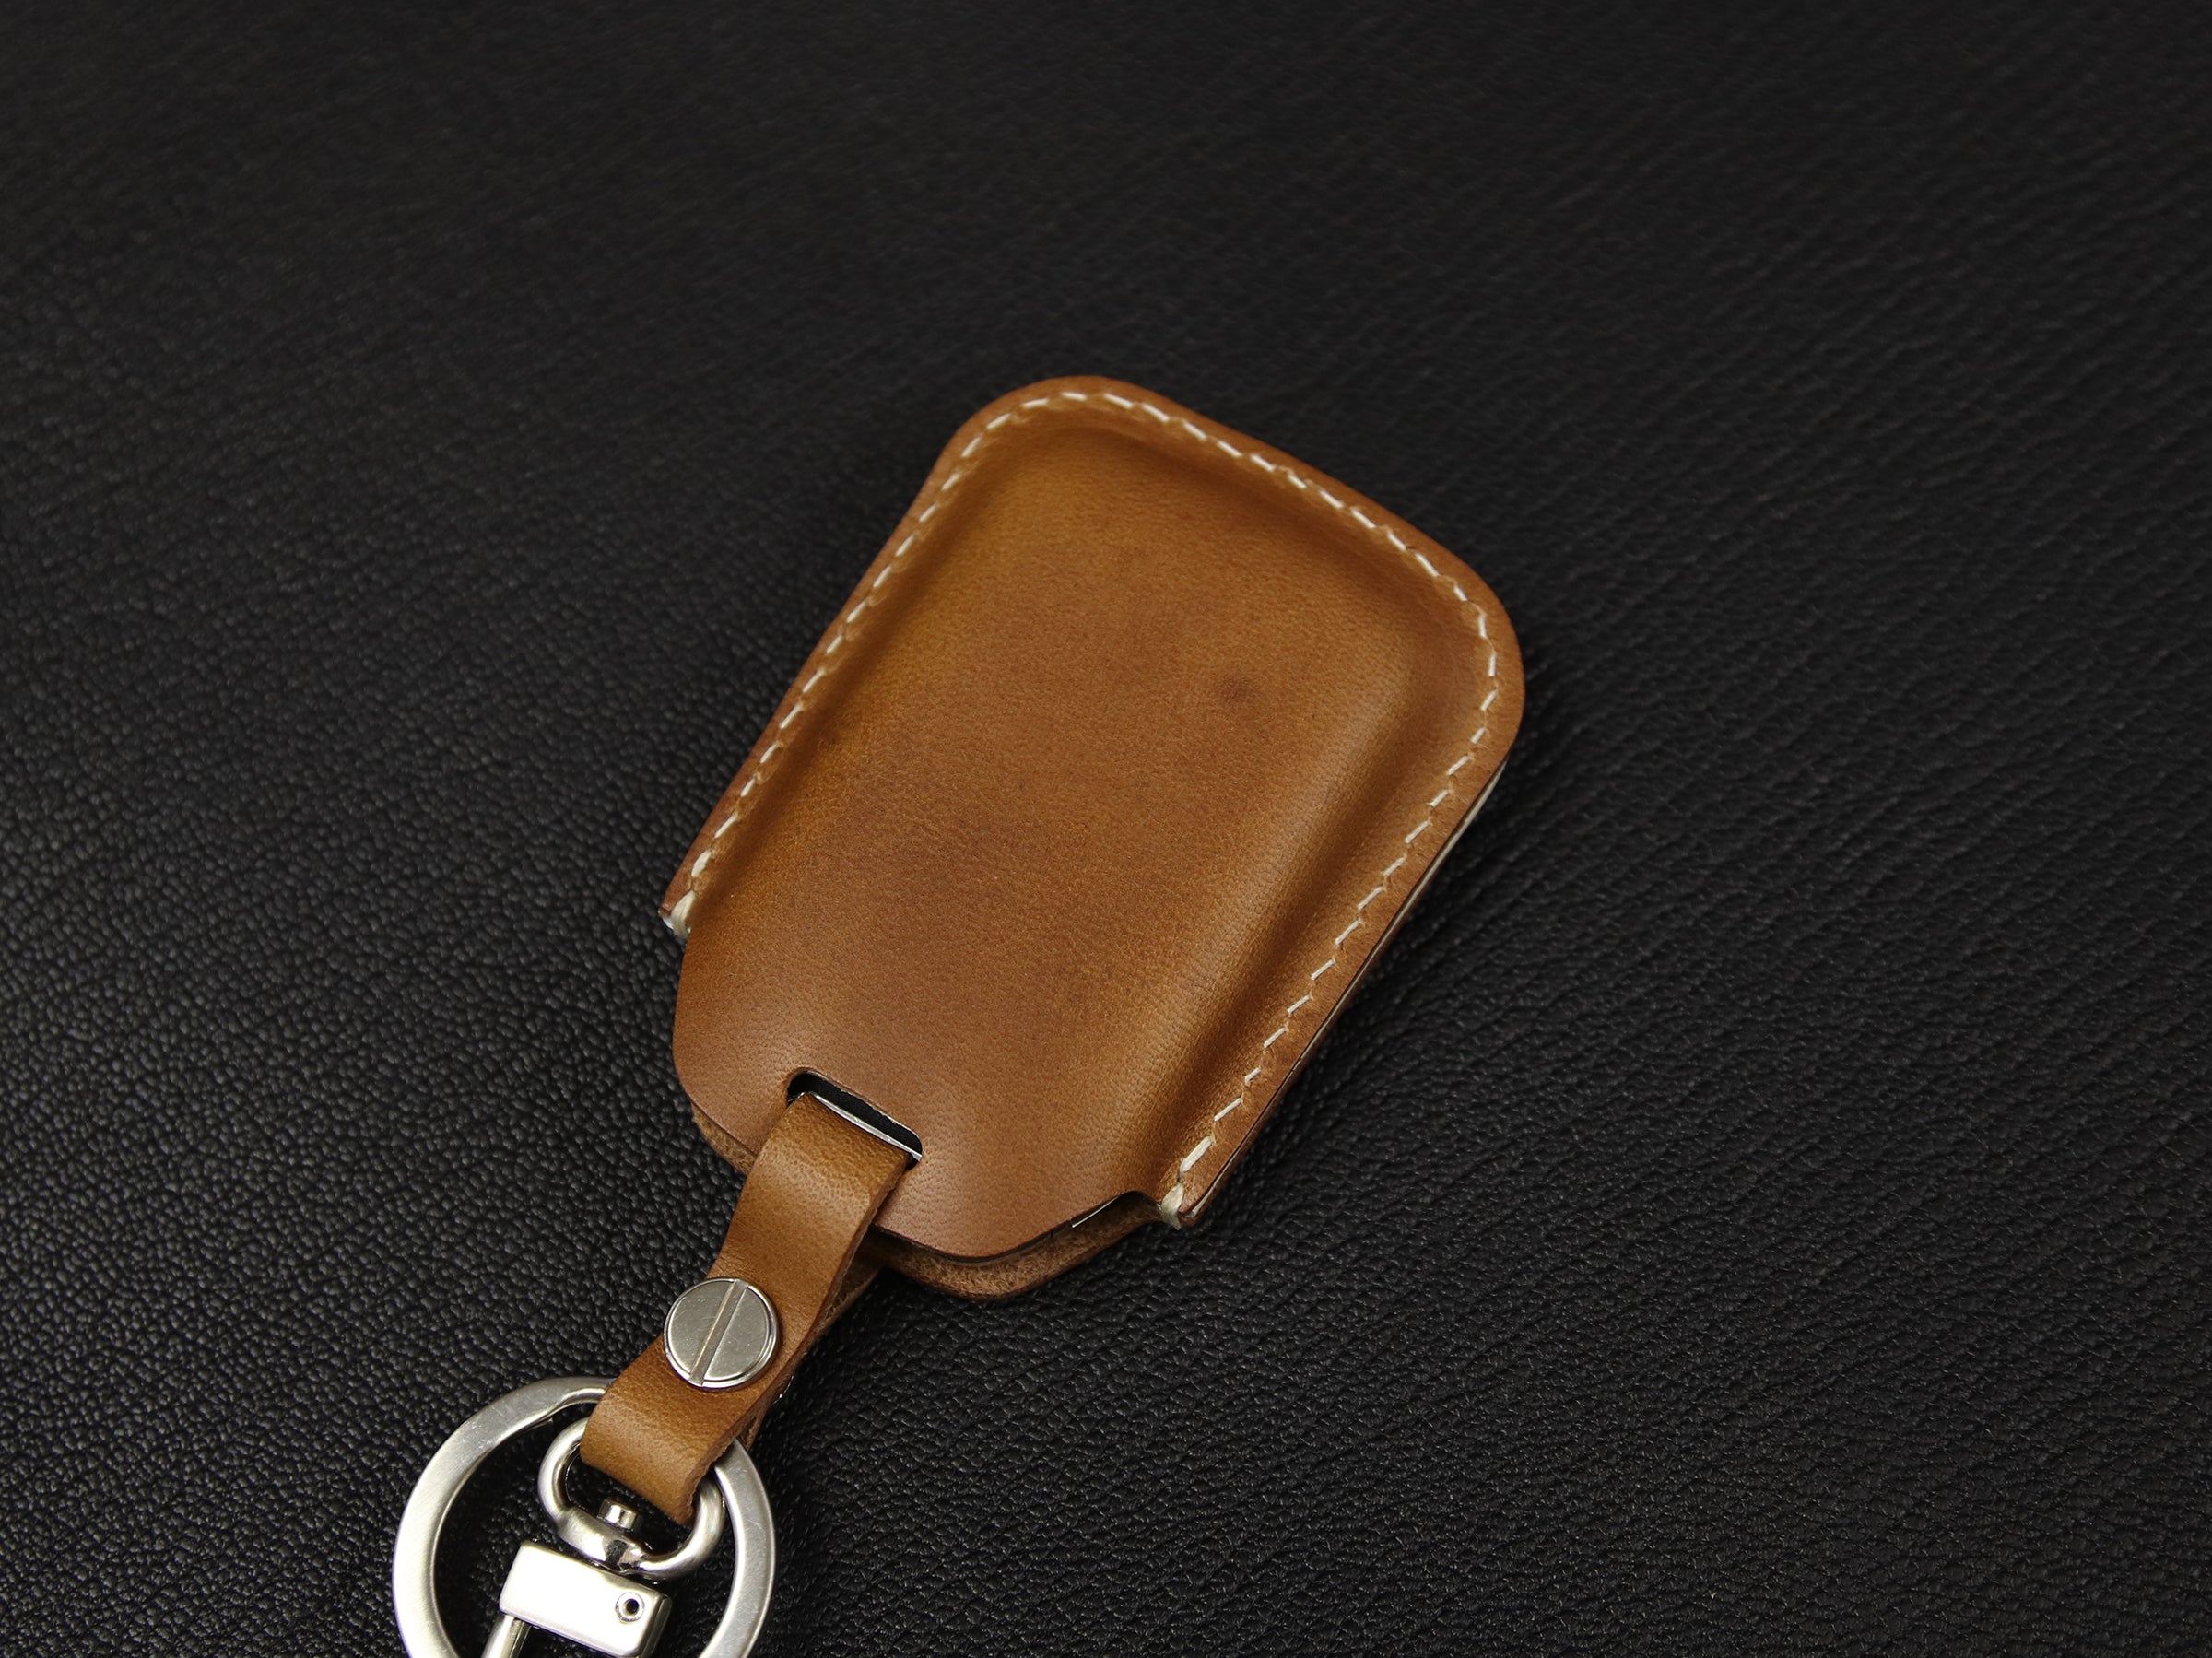  SANRILY Golden-edge Key Fob Cover for Buick Envision 2021 2022  for Chevy Suburban Tahoe Silverado 1500 LT GMC Yukon Keyless Full  Protection Key Case Shell with Bling Keychain Beige : Automotive